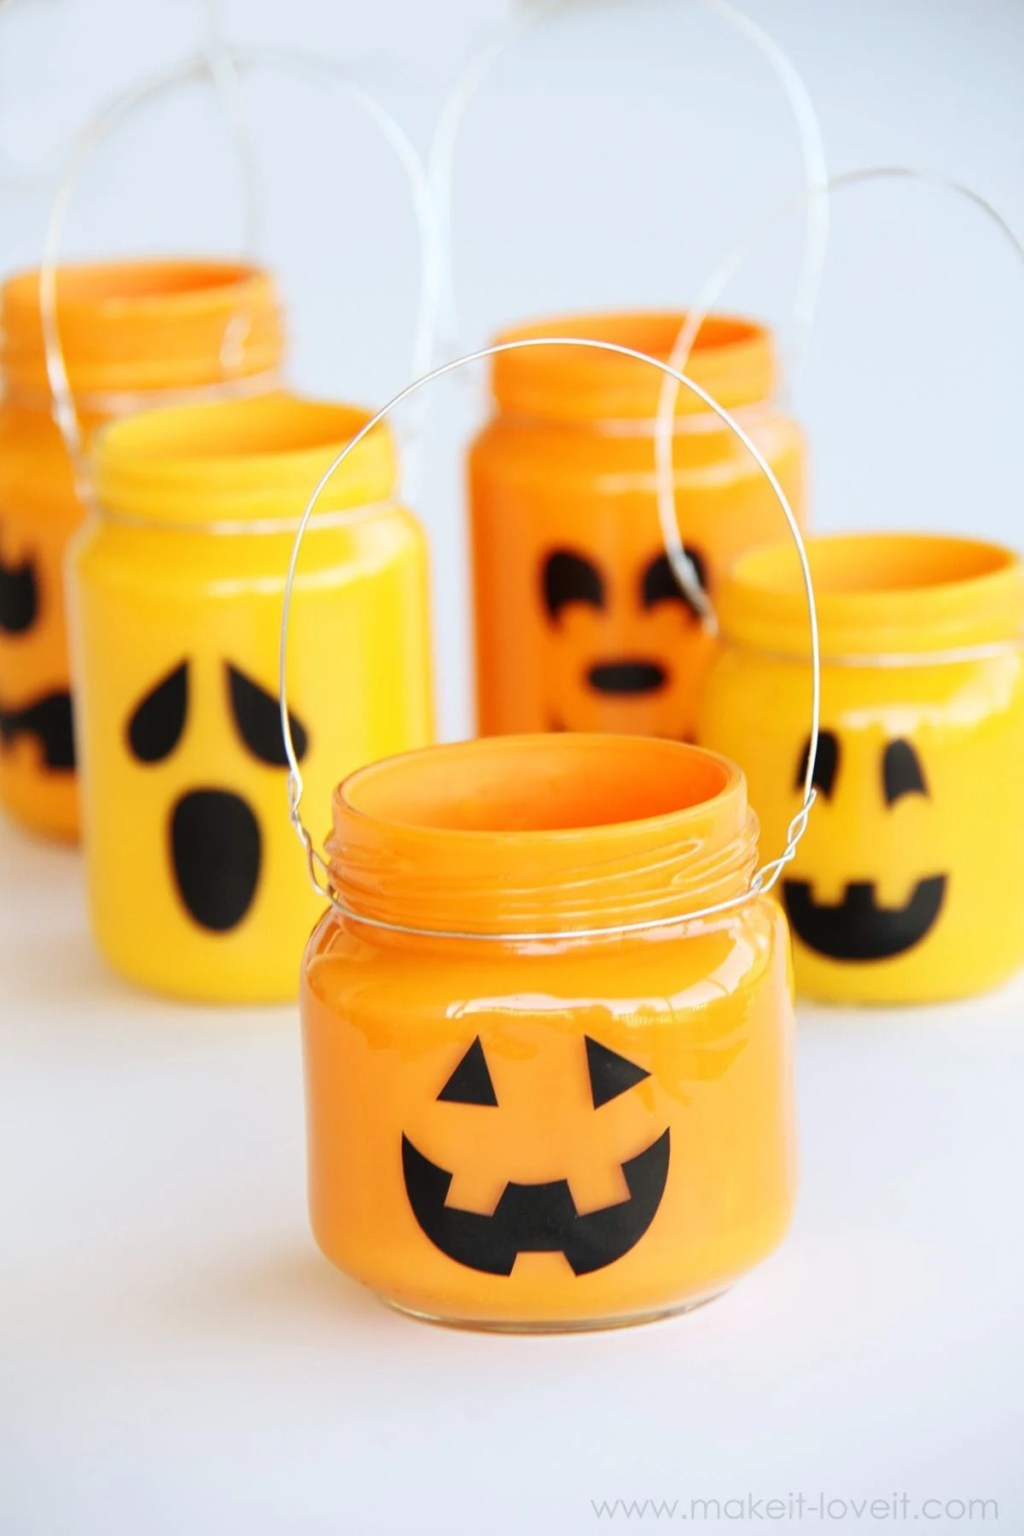 20 Halloween mason jar ideas that’ll spice up your home - juelzjohn